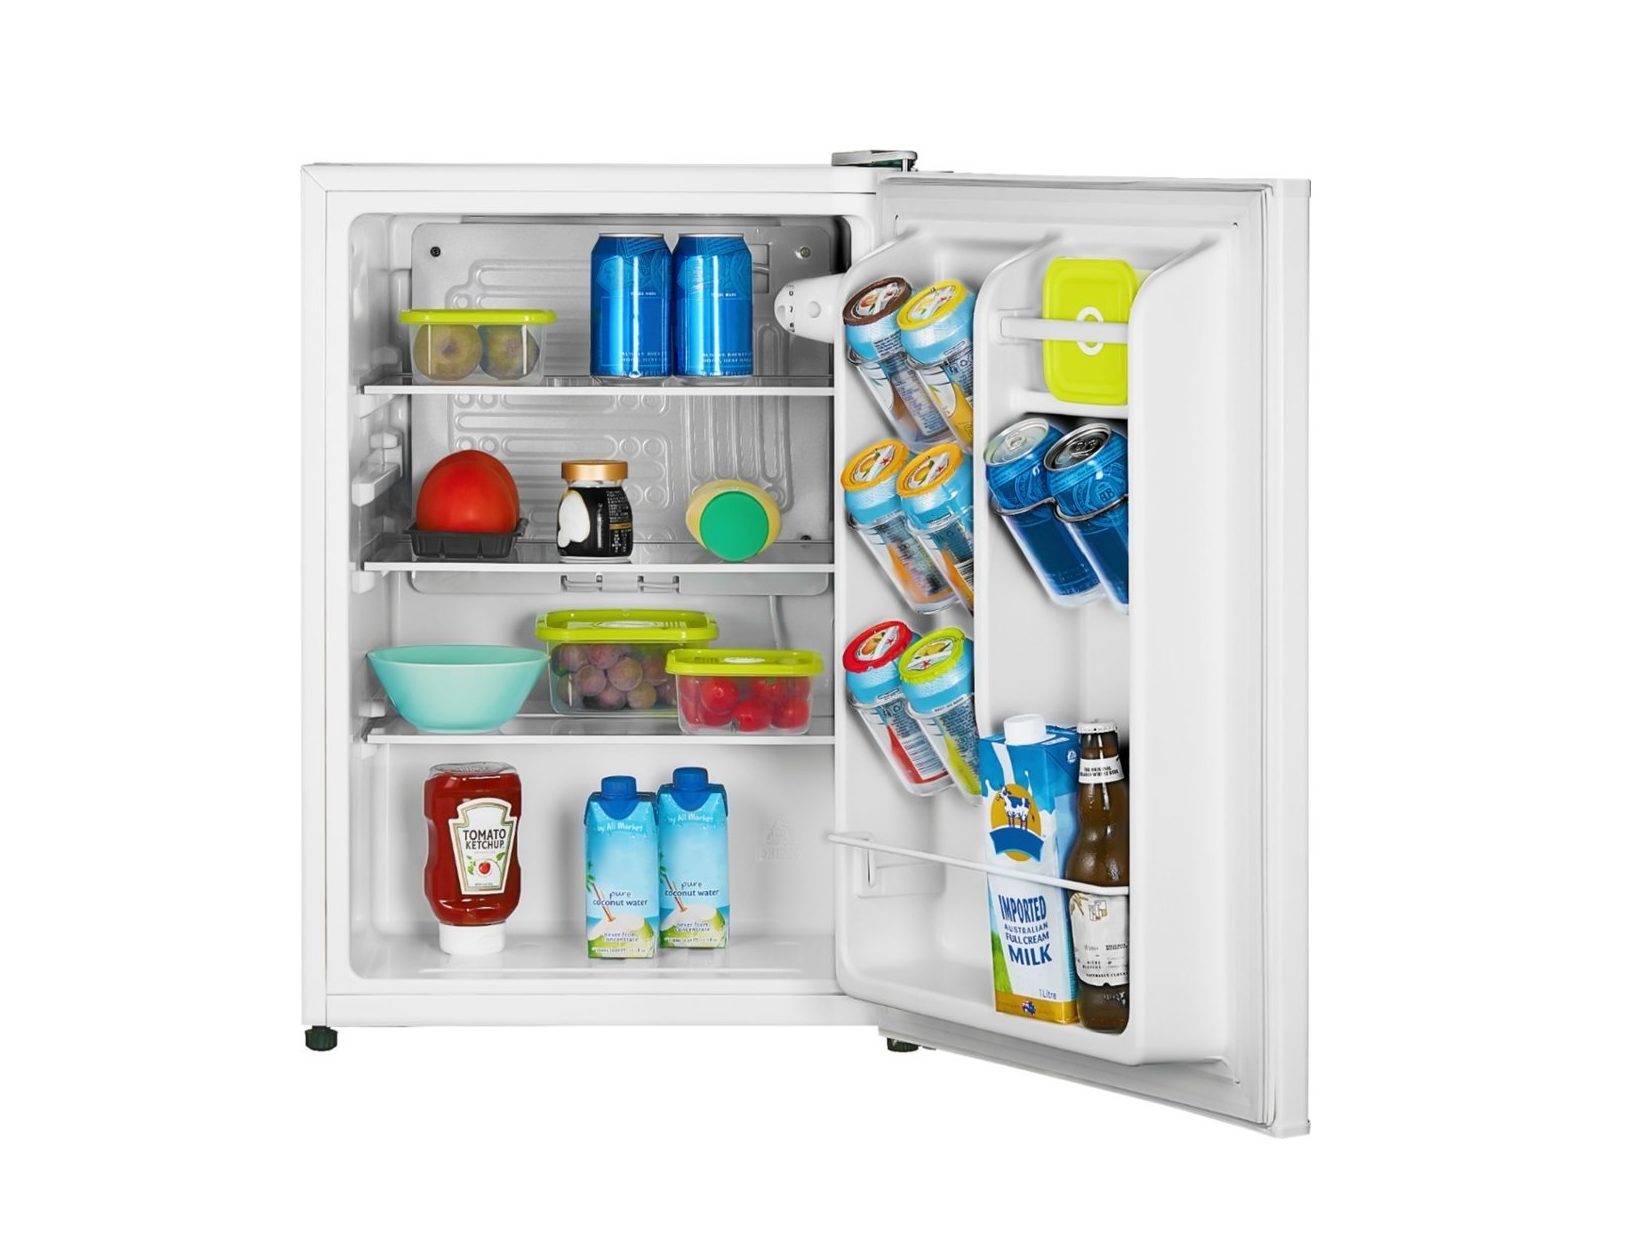 An inside look at how your Insignia 2.6 Cubic Foot Mini Fridge might look.